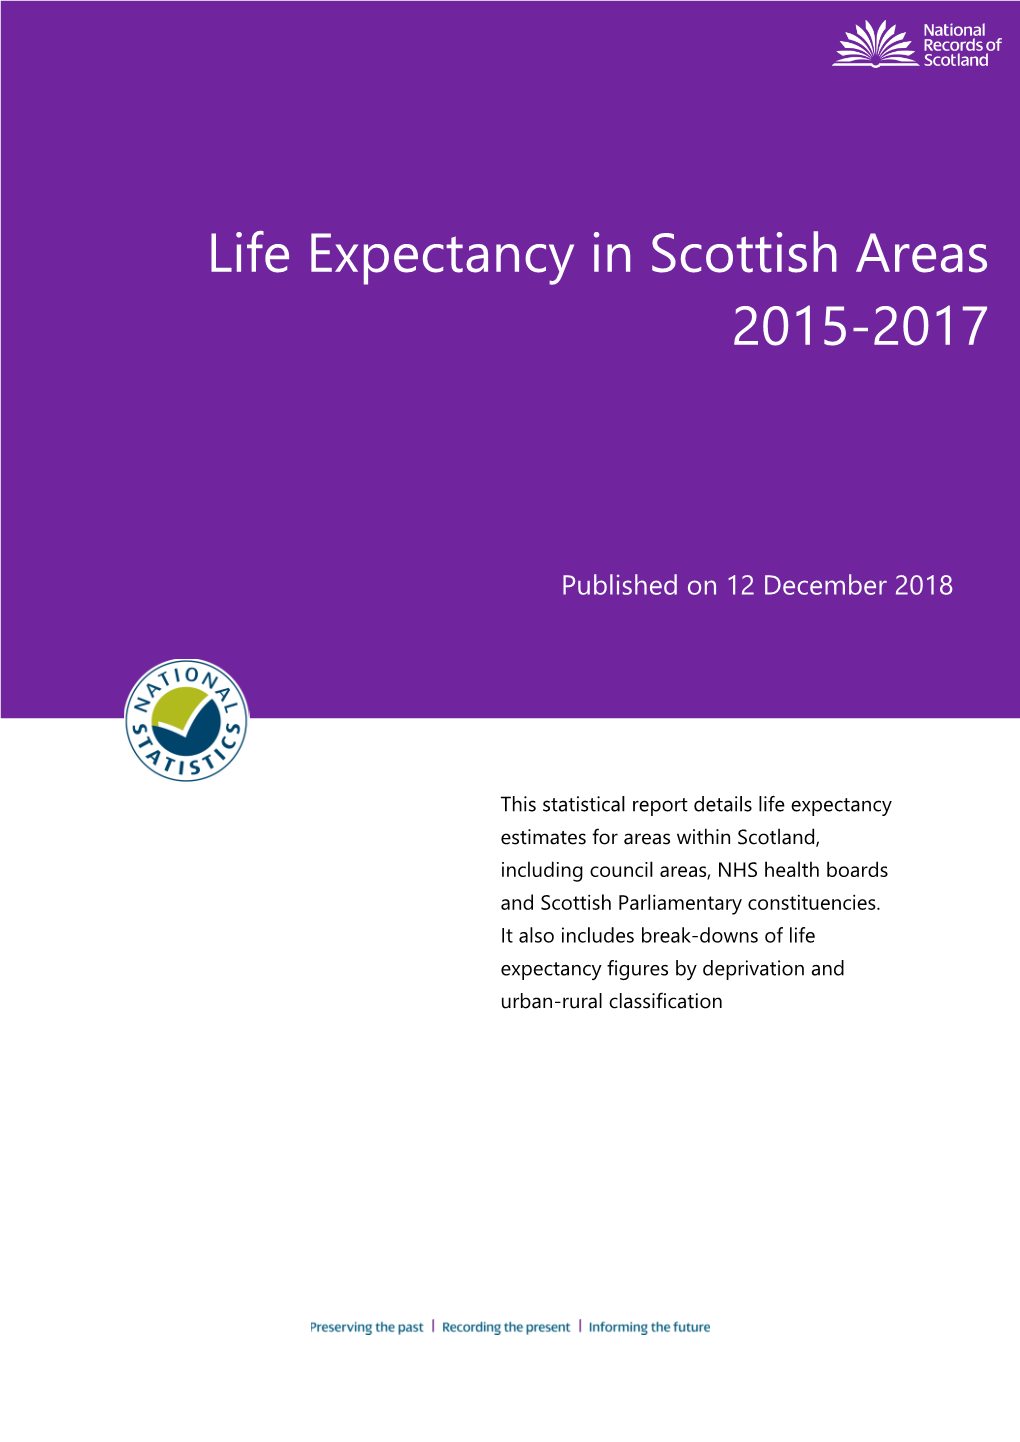 Life Expectancy in Scottish Areas 2015-2017